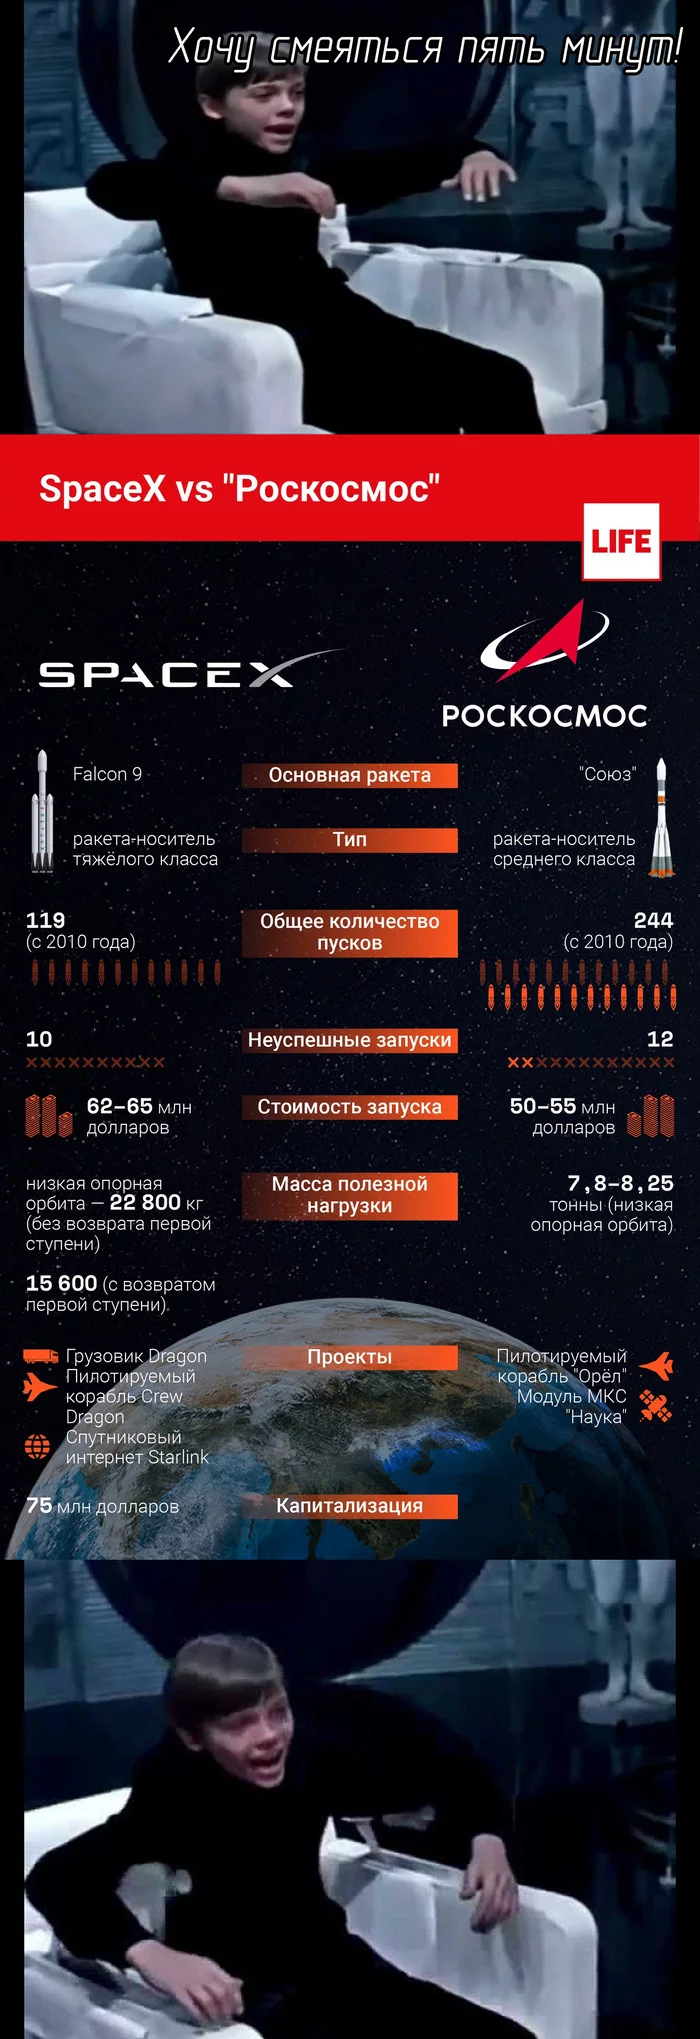 Oh, these unbiased comparisons - My, Space, Roscosmos, Spacex, Union, Rocket union, Falcon 9, Super Heavy, Life, , I want to laugh for 5 minutes, Humor, Memes, Longpost